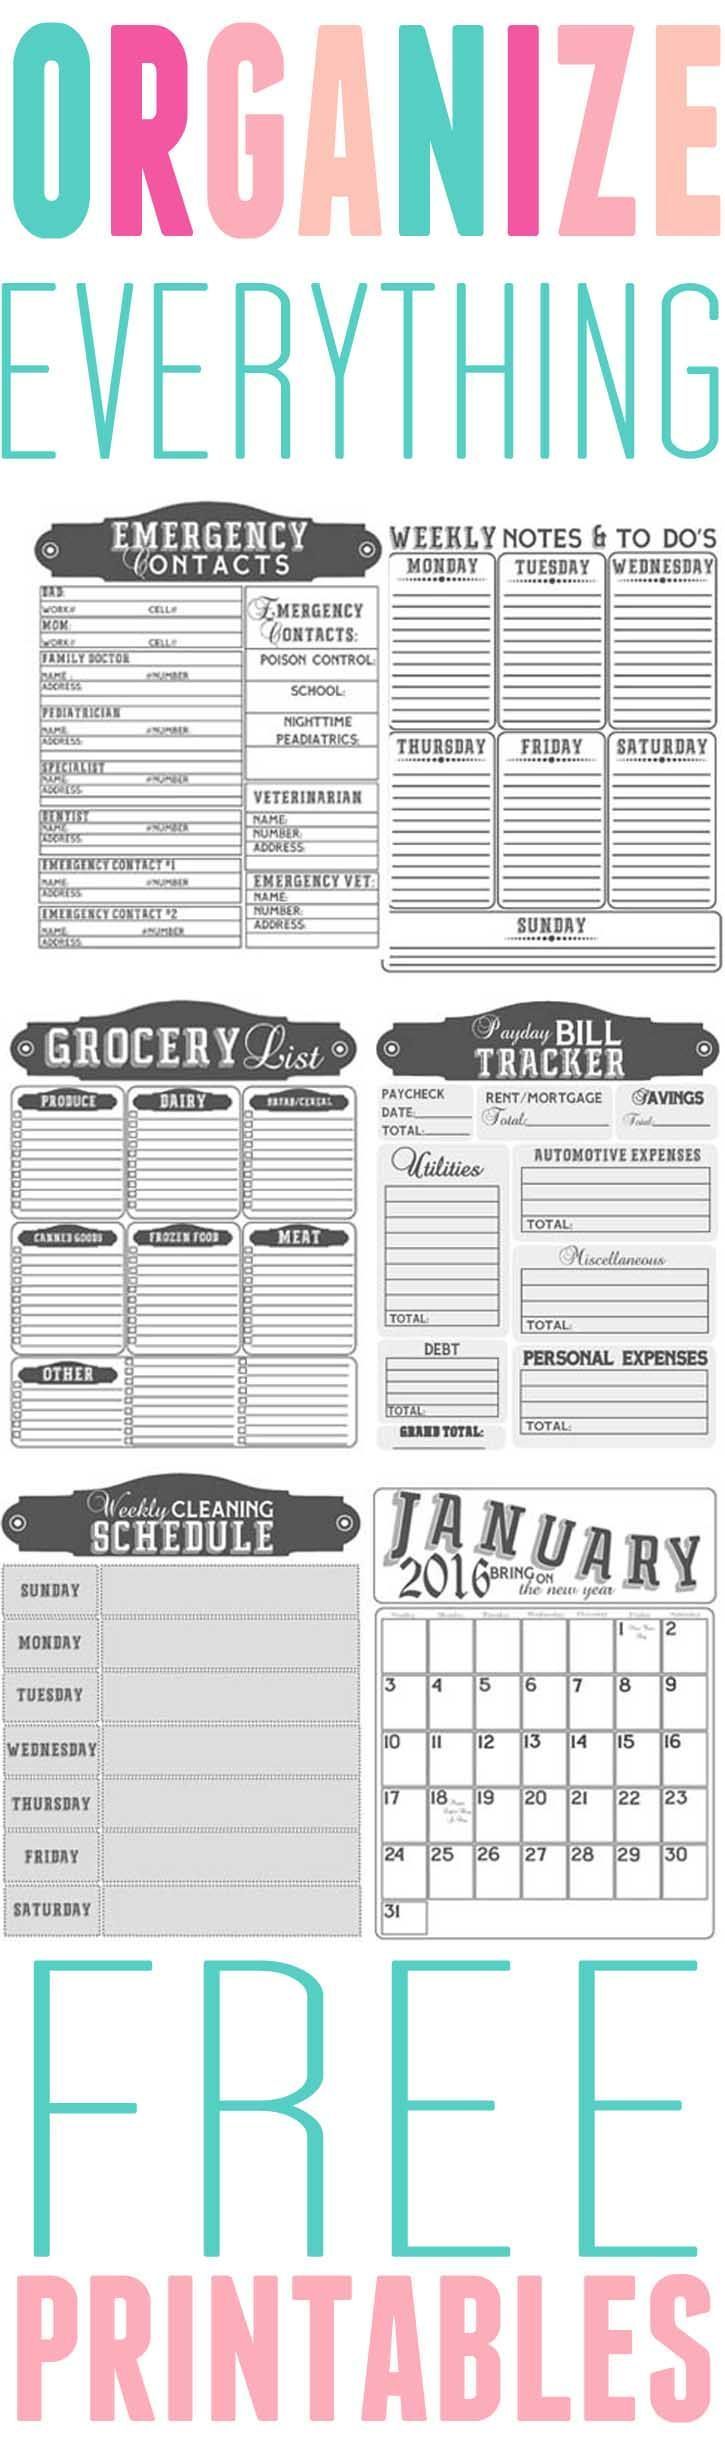 Get Organized- Free printables to organize your home in 2016